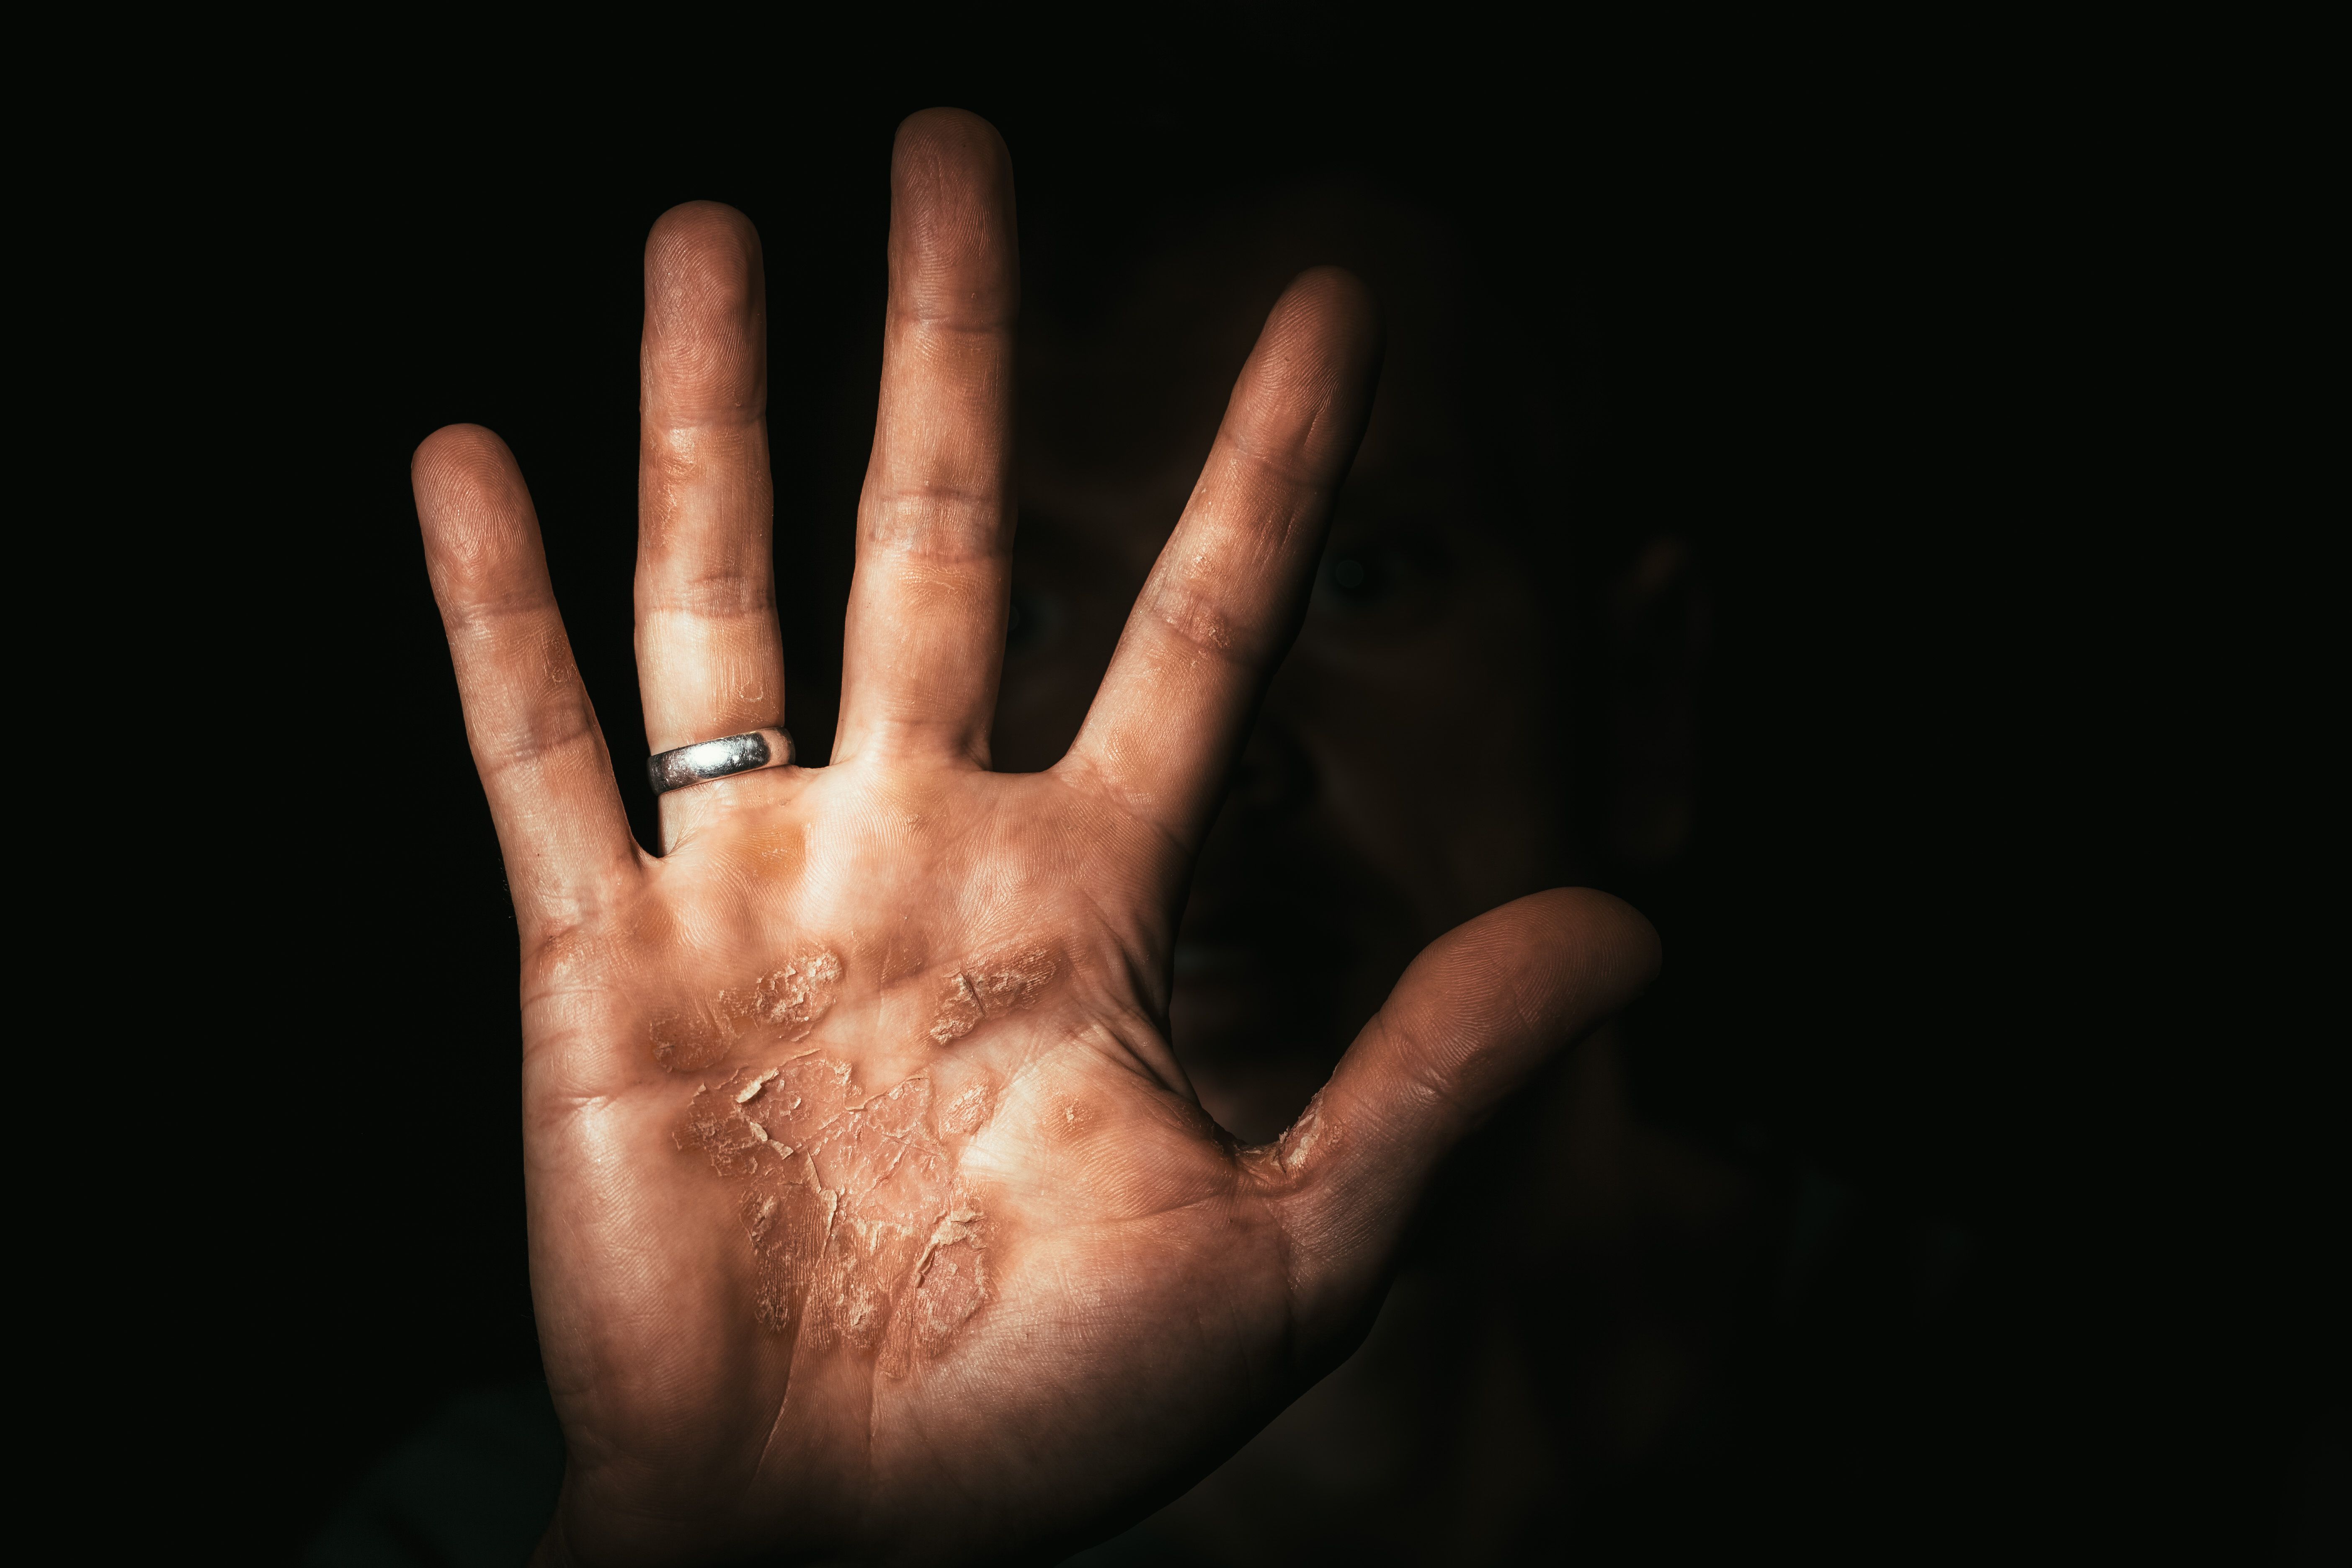 dark hand of a worker with b calluses protests. Stop | vovan - stock.adobe.com